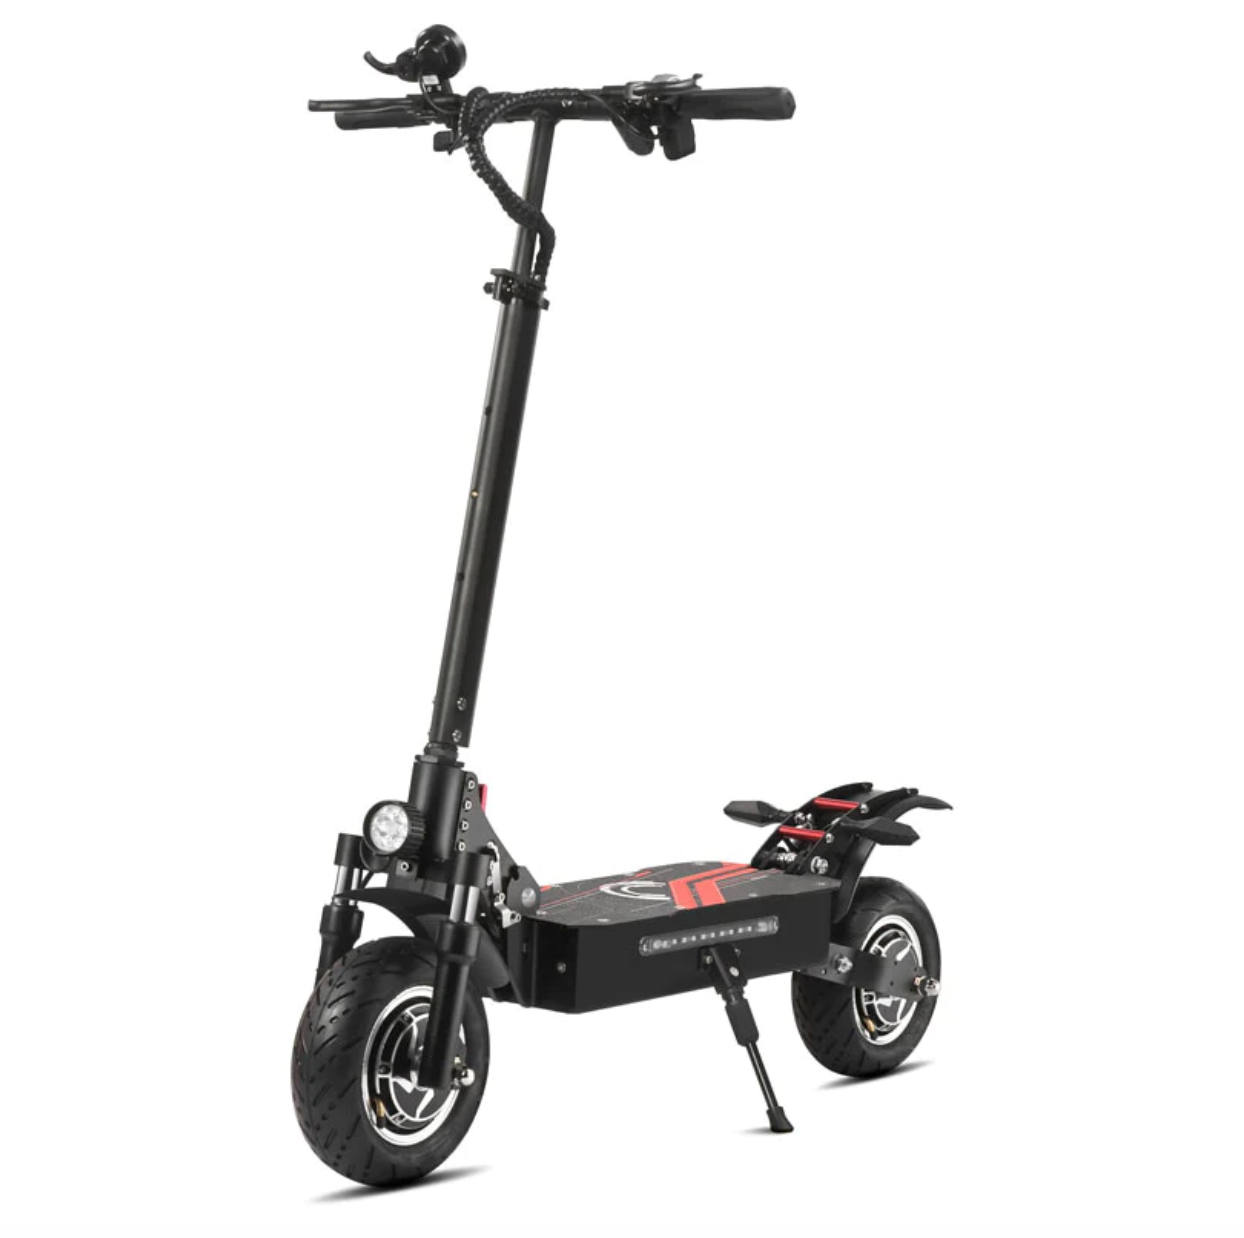 Teewing Q7 Pro Electric Scooter